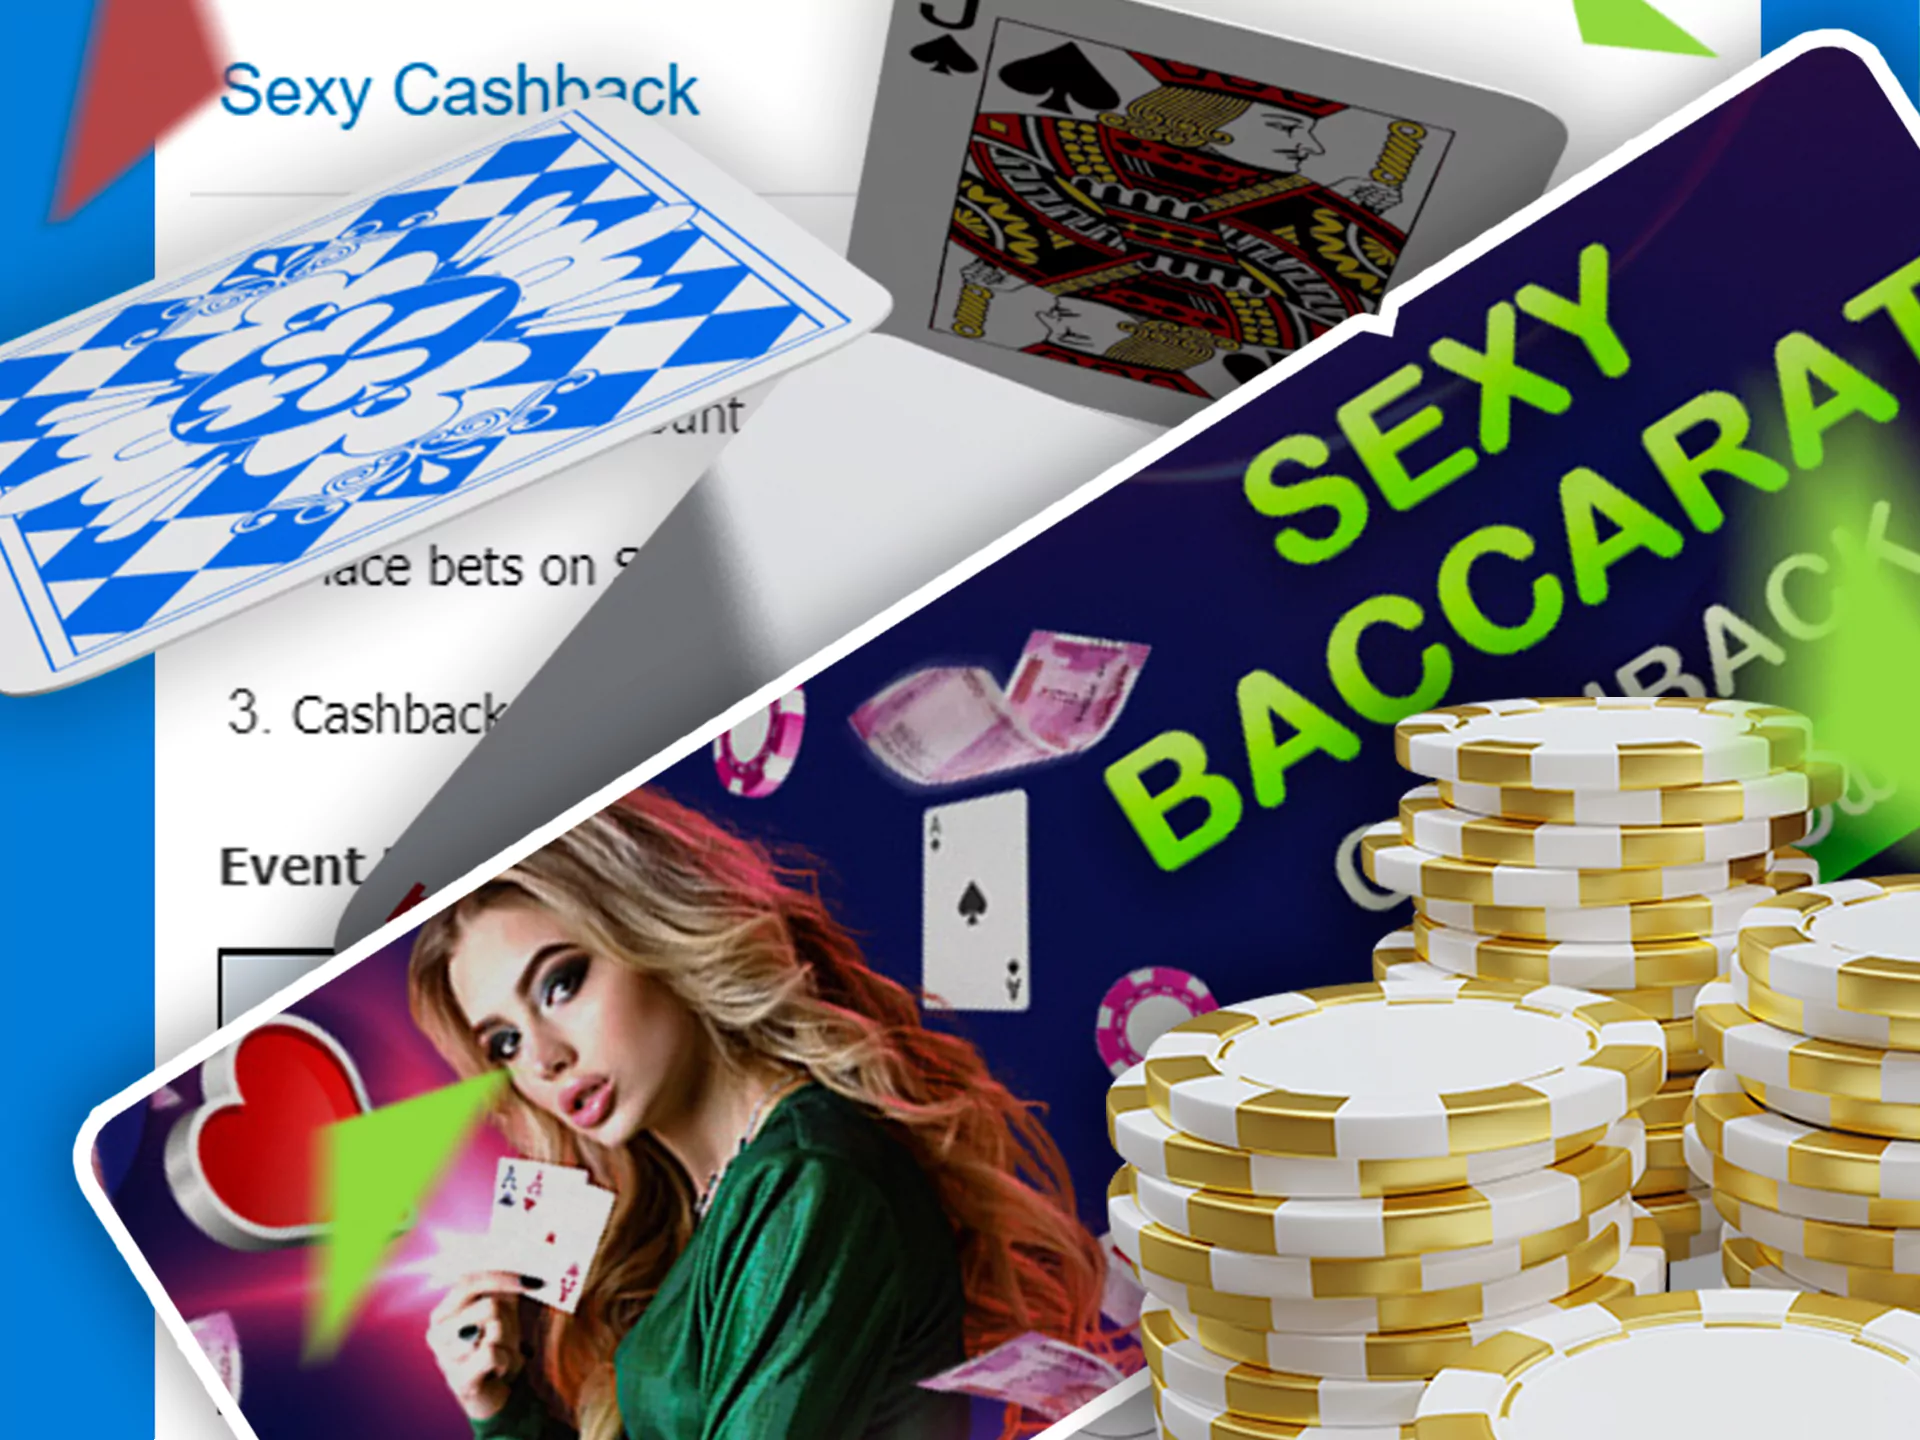 If you are a fan of live casino card games, visit the baccarat section.